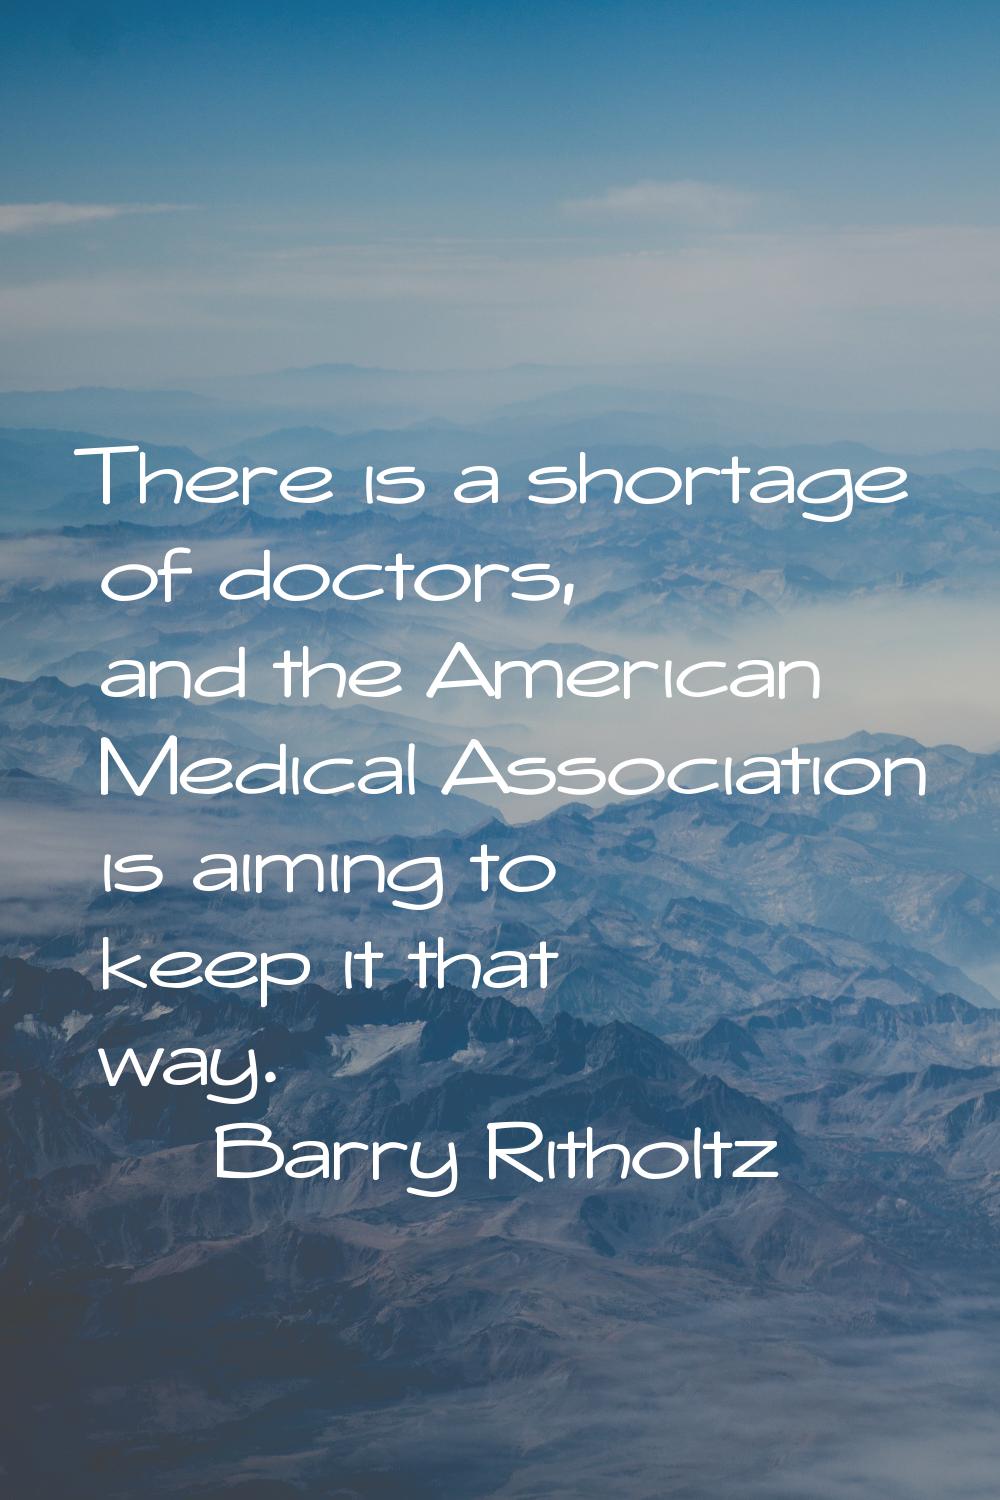 There is a shortage of doctors, and the American Medical Association is aiming to keep it that way.